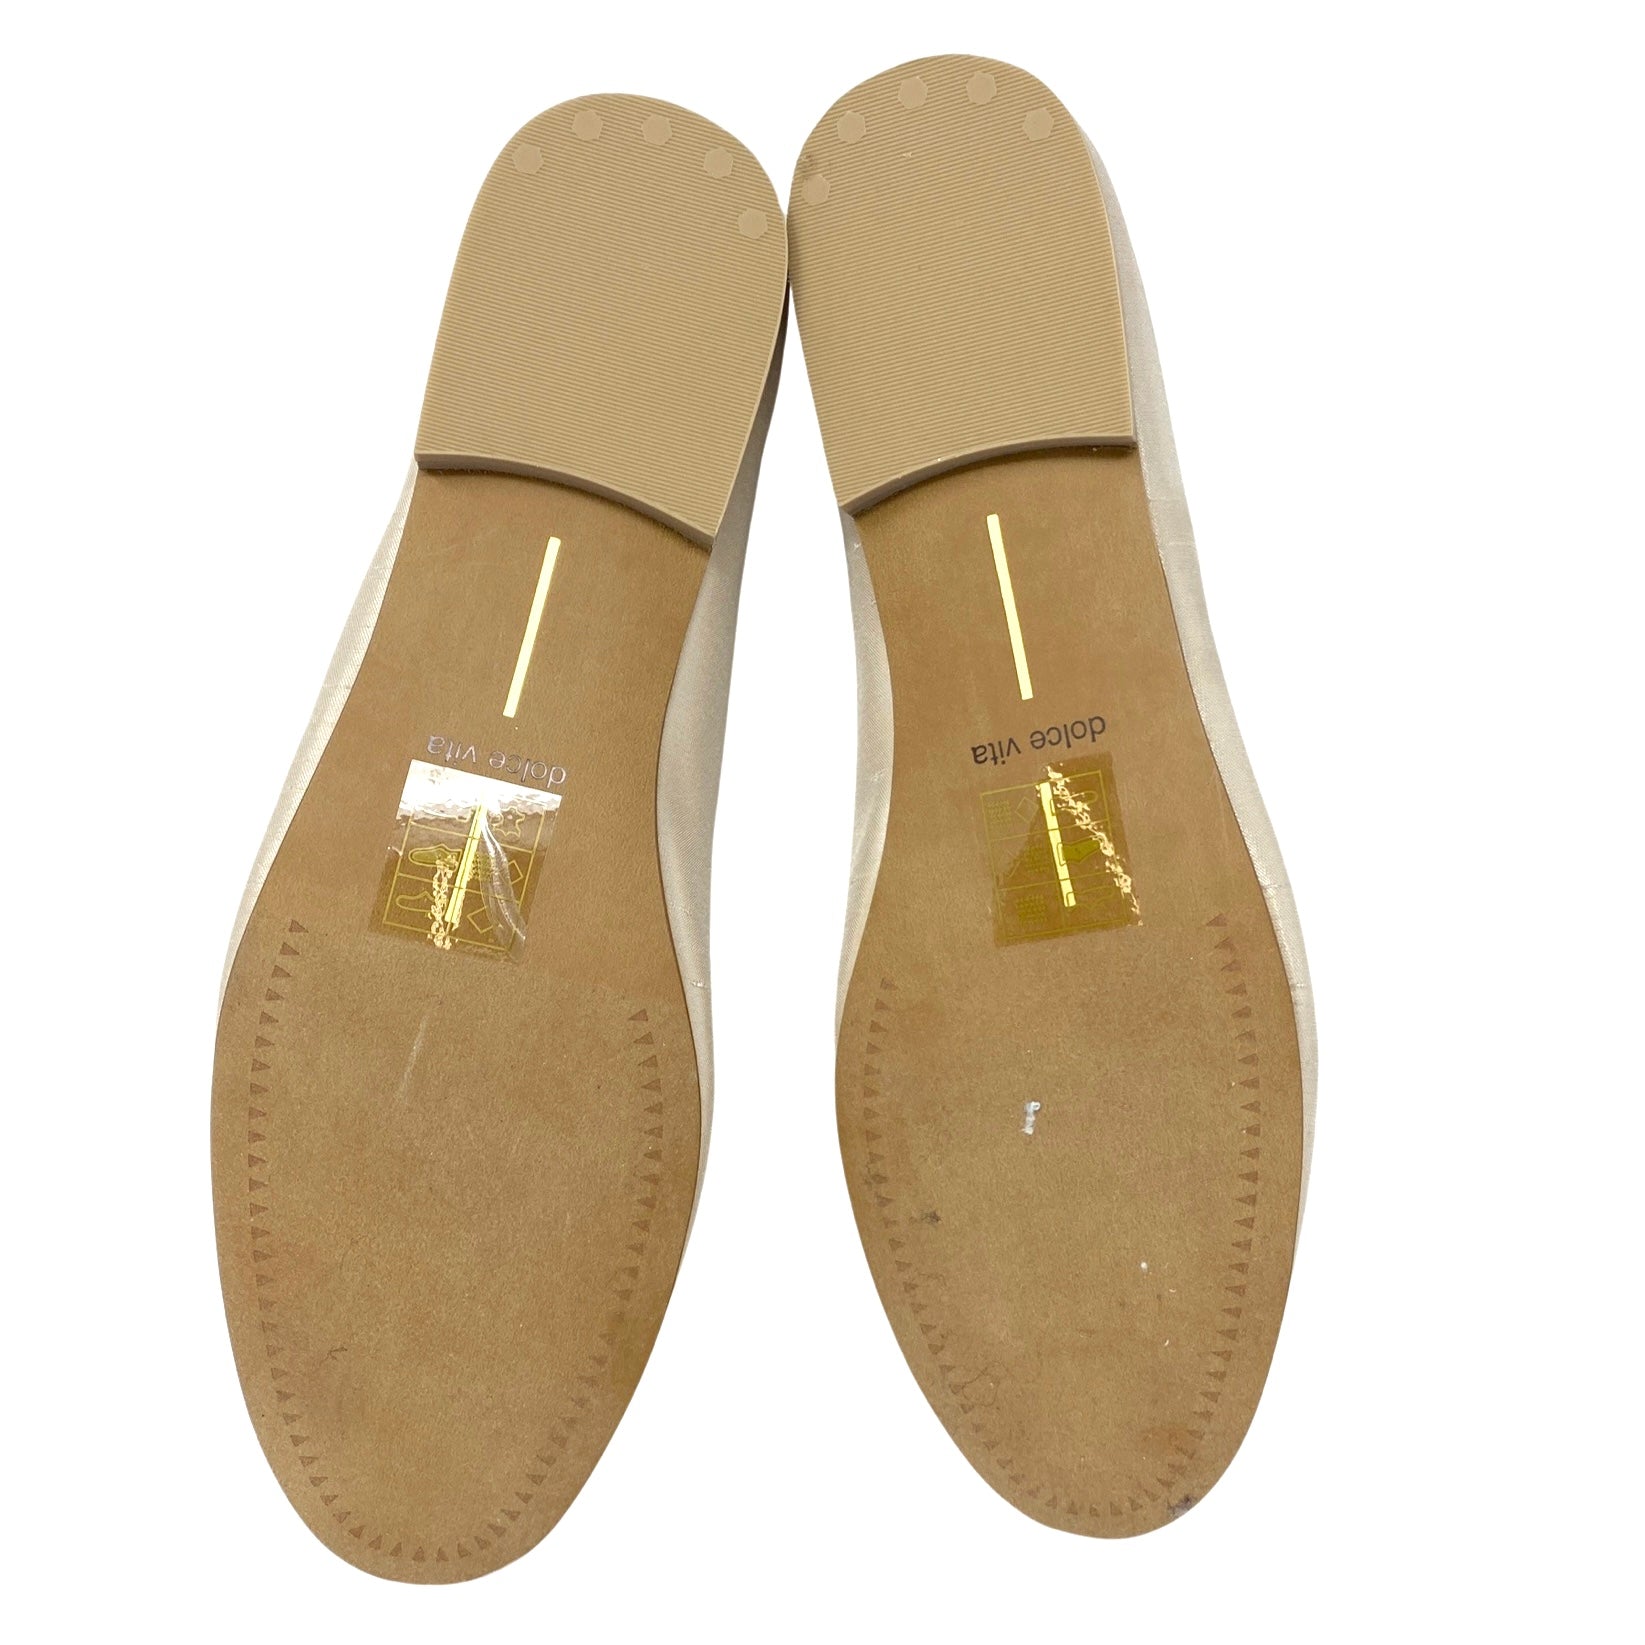 Dolce Vita Cacy Pearl Ballet Flats